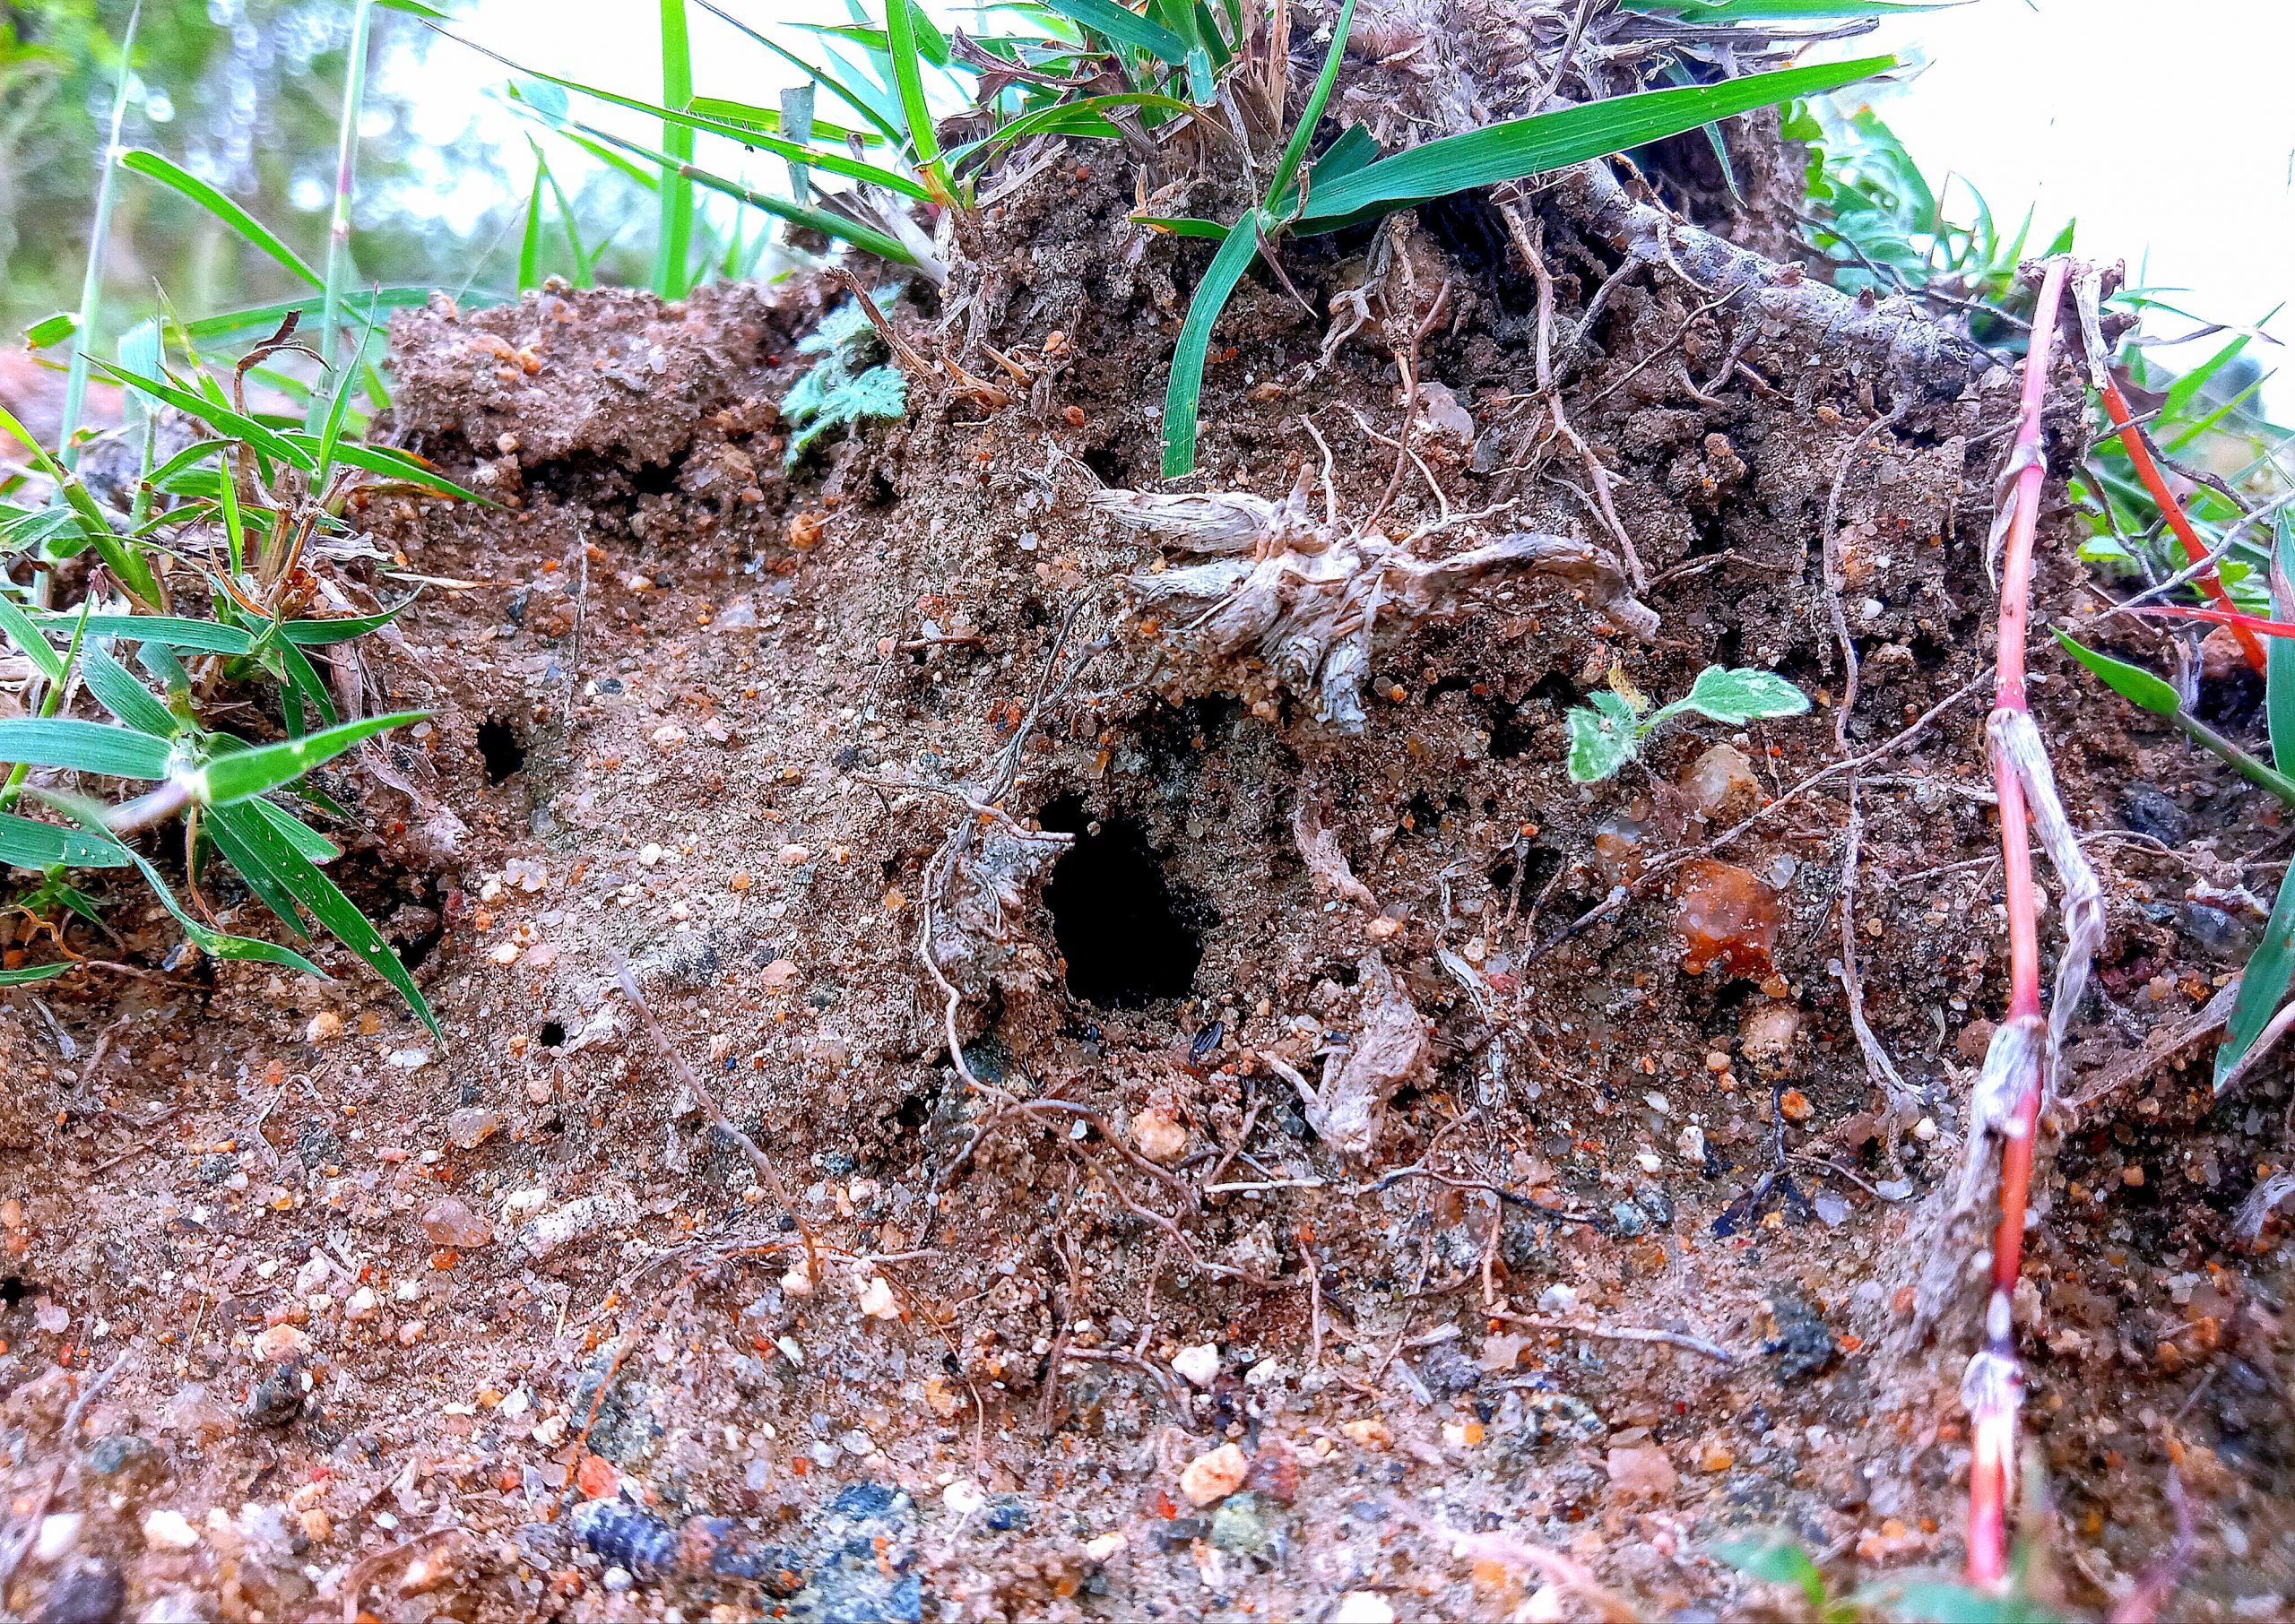 Insect hole